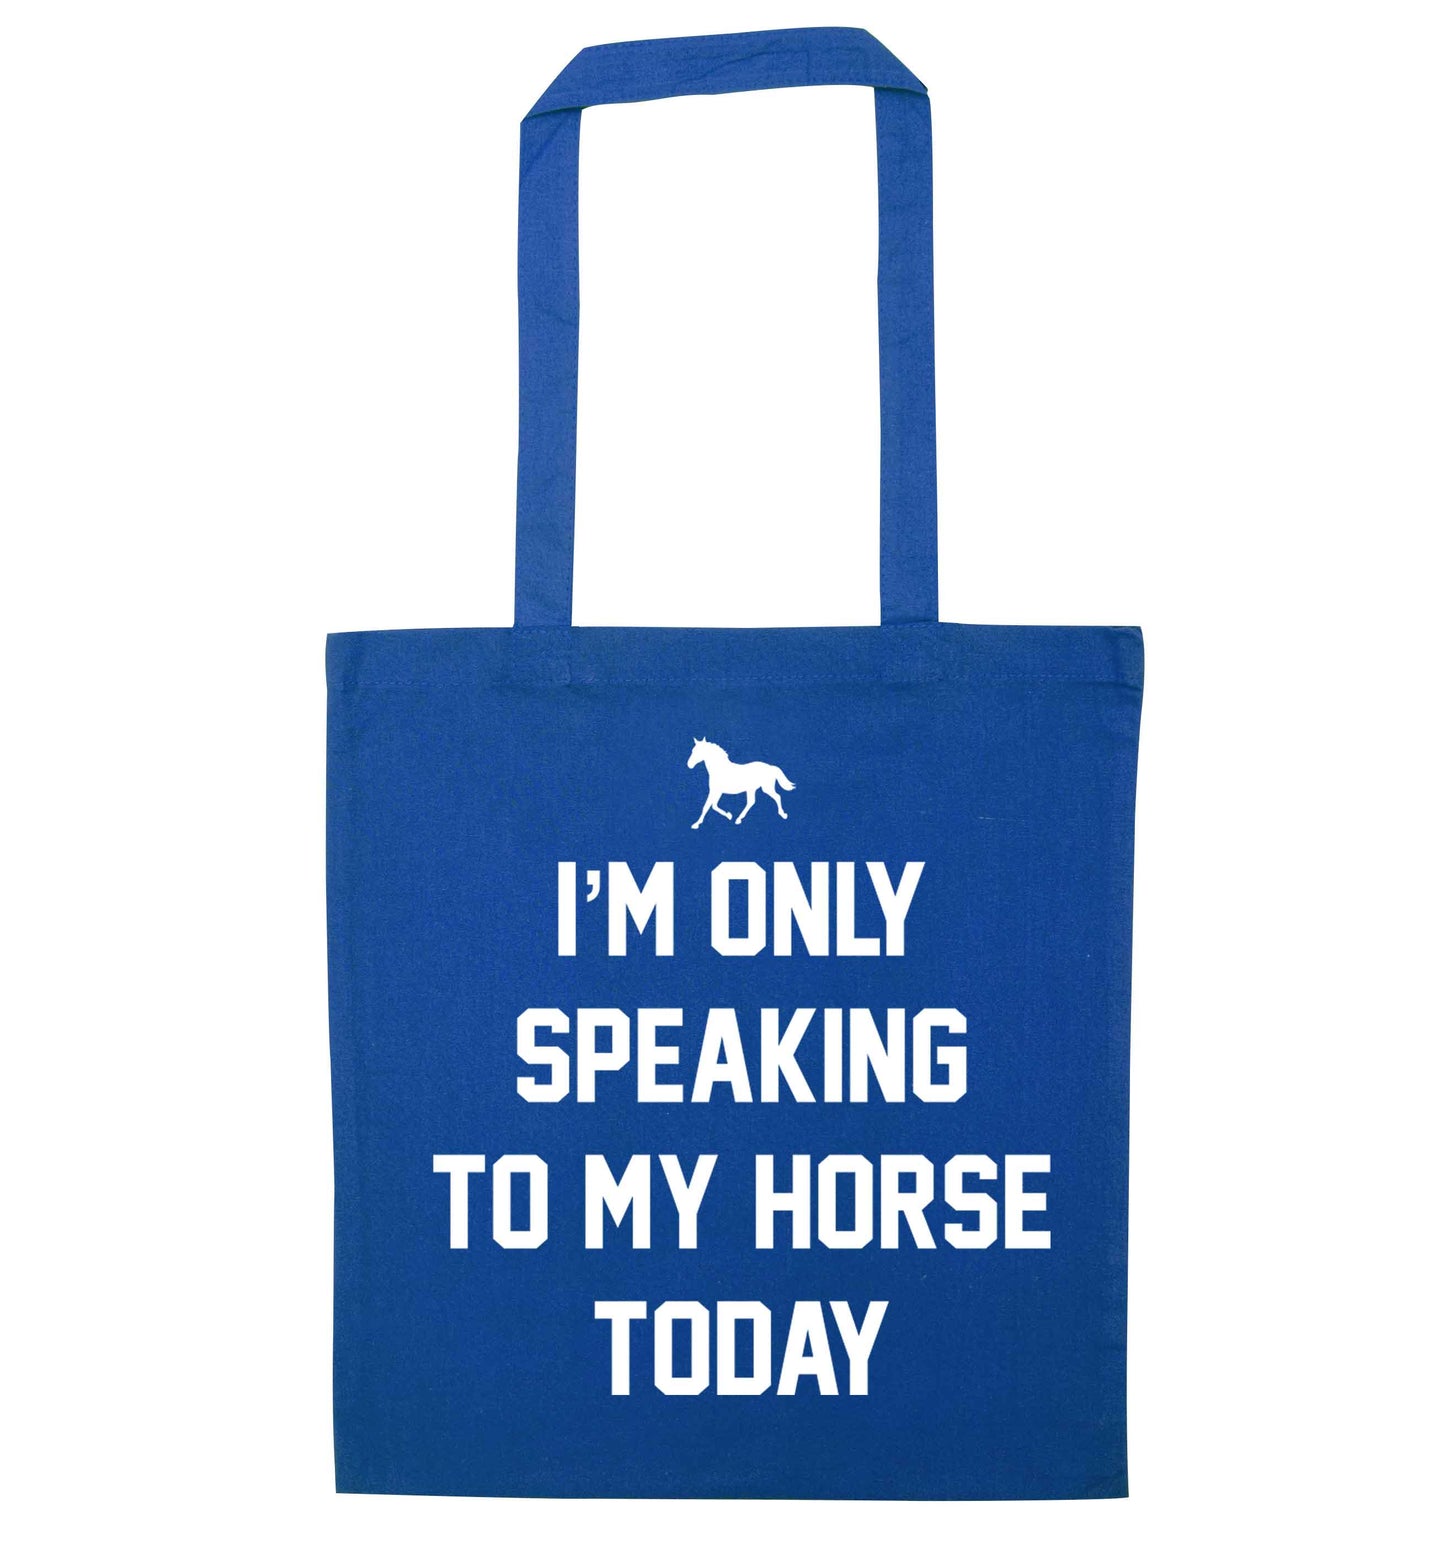 I'm only speaking to my horse today blue tote bag